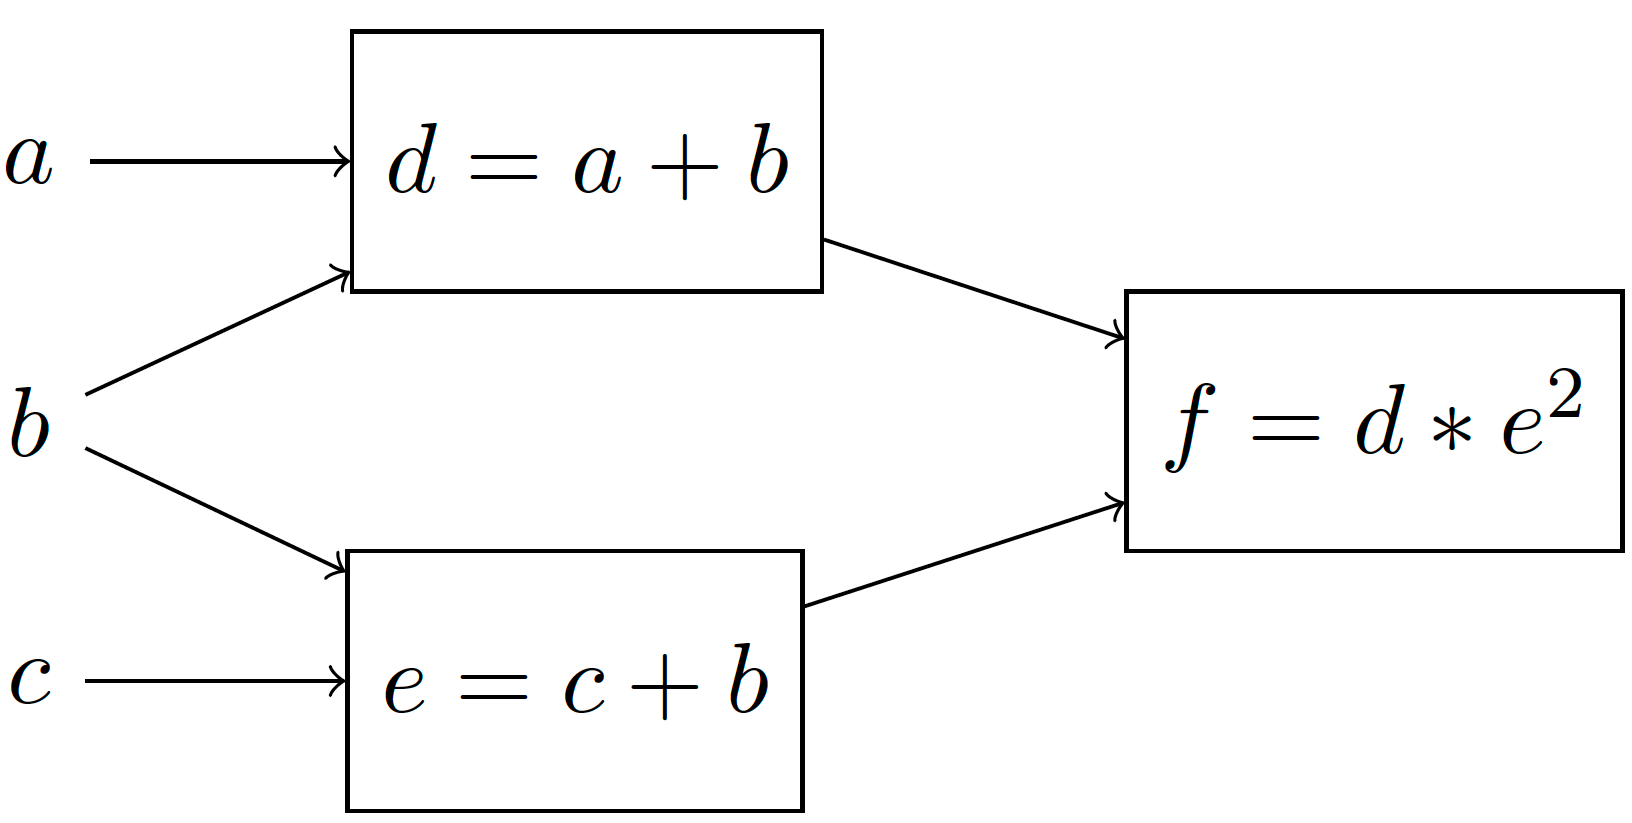 An example of a deterministic computation graph.